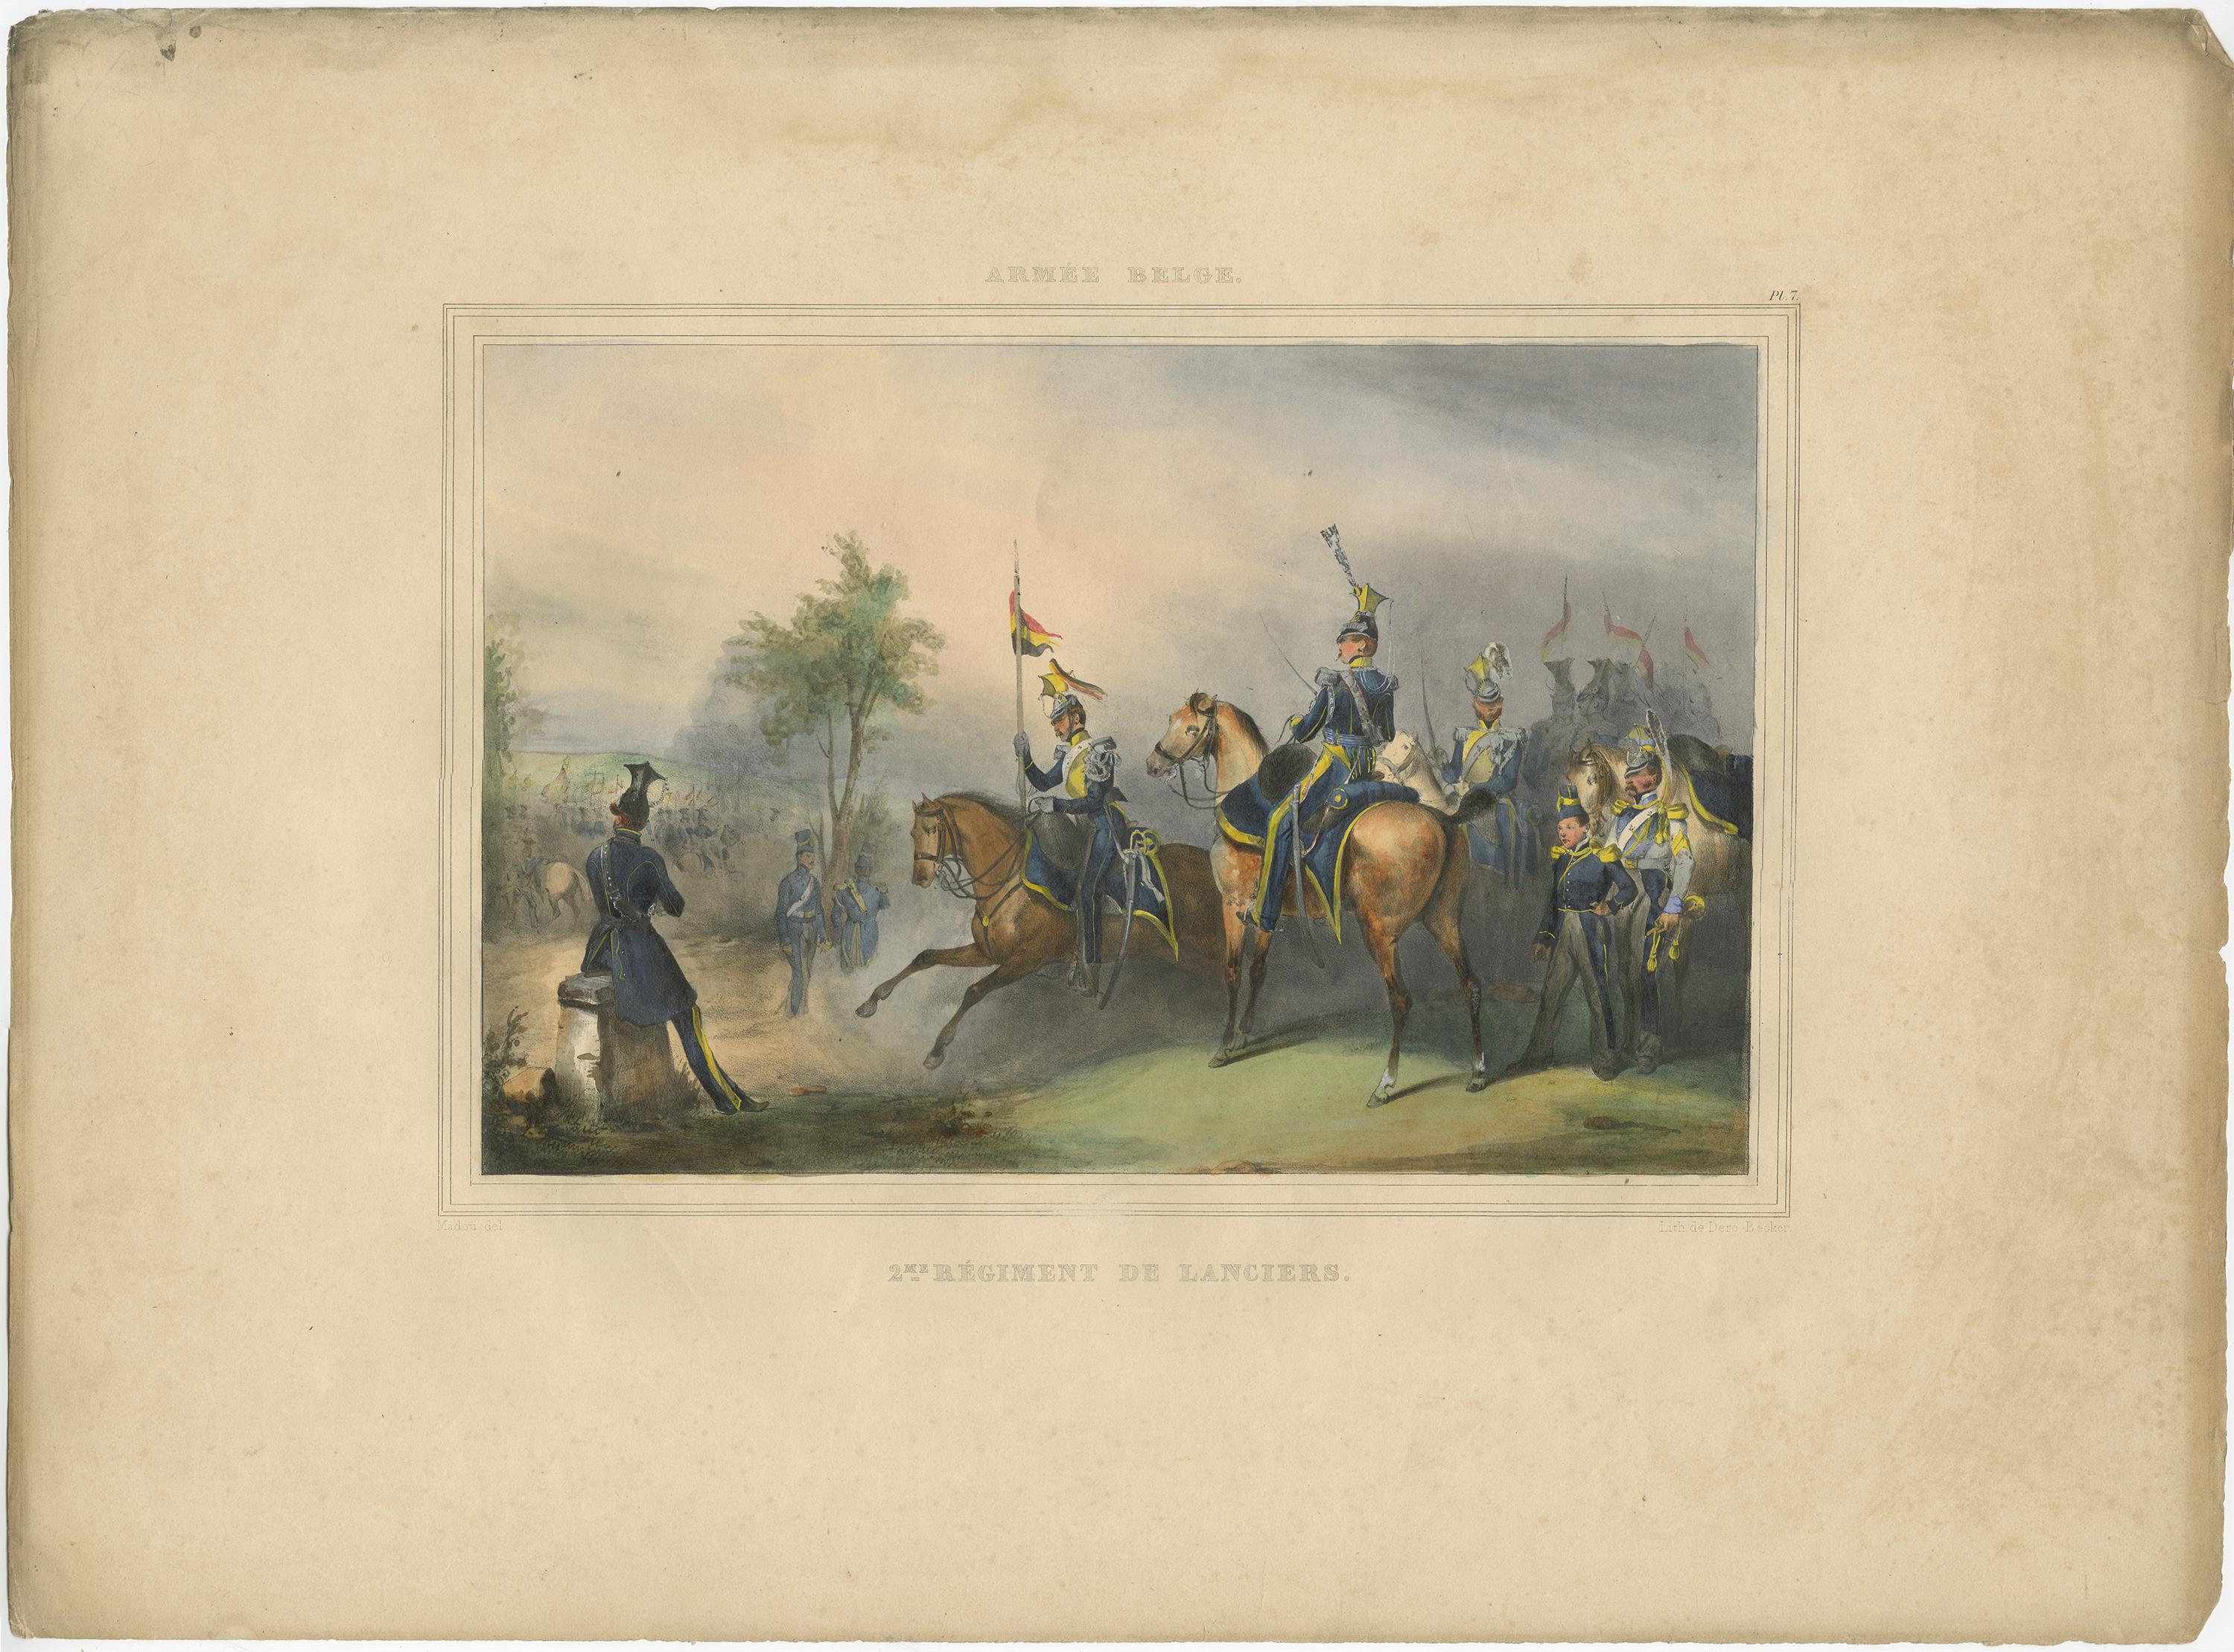 One nicely hand coloured print of an original serie of 23 plates, showing officers and soldiers on horses in beautiful army costumes holding spears. published in 1833. Rare.

From a serie of beautiful lithographed plates with Belgian military